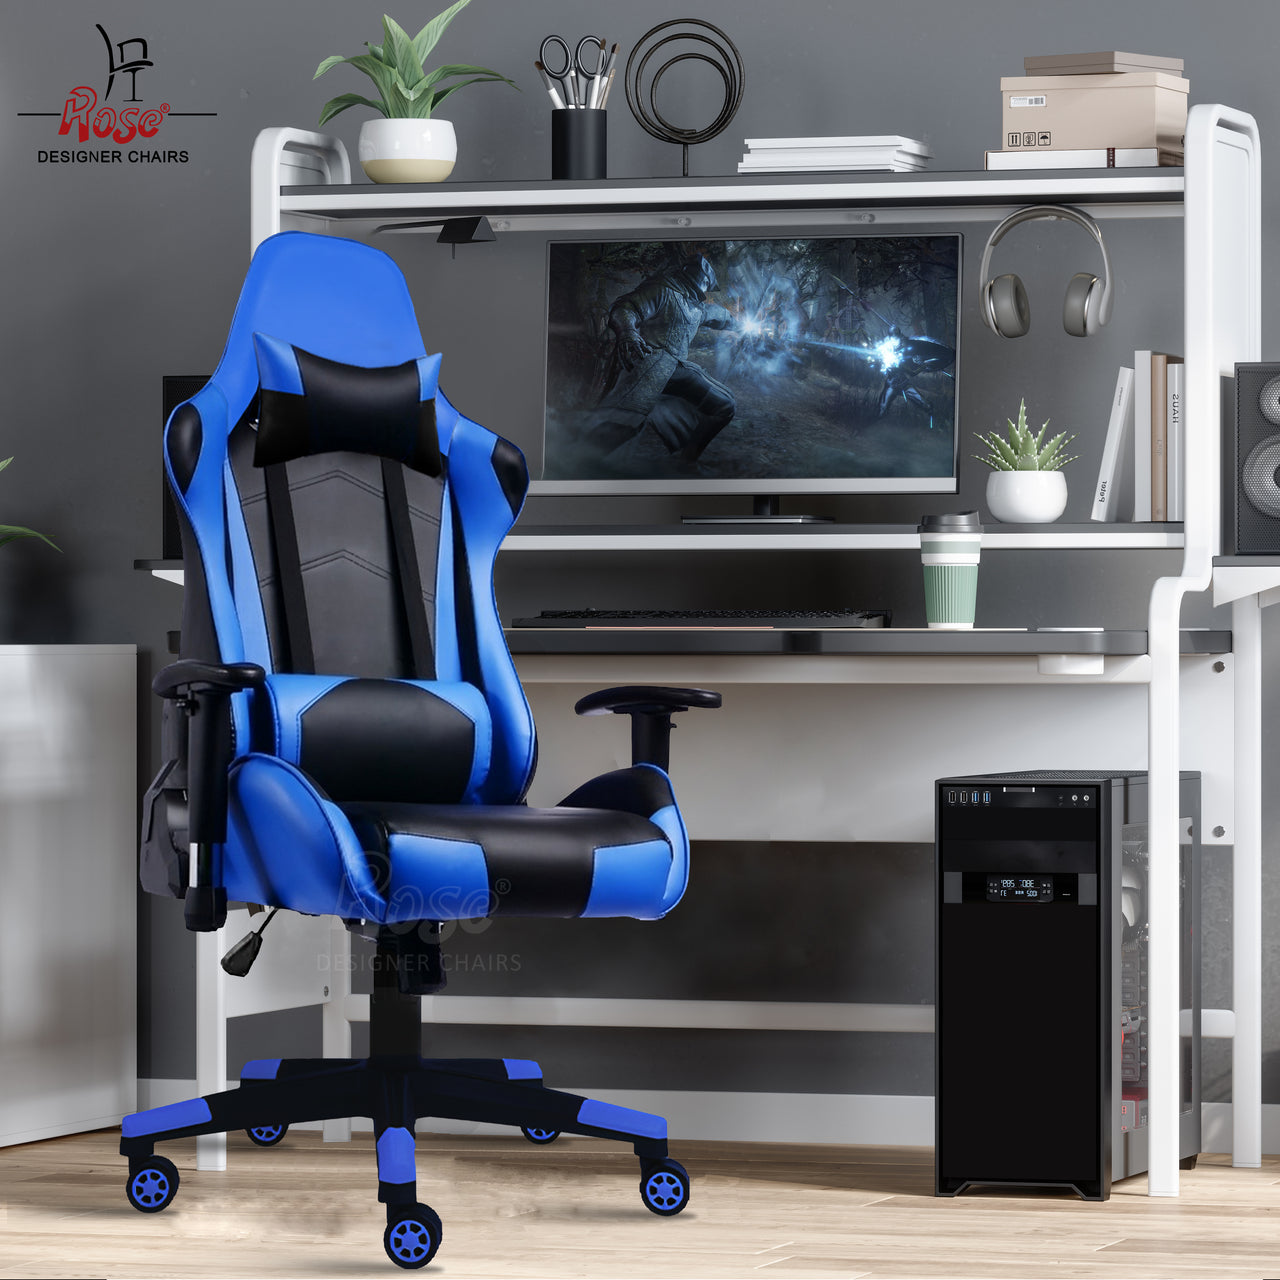 Up Gamer Multi-Functional Footrest Ergonomic Gaming Chair with Lumbar Support | Adjustable Back Rest | Fixed Arm Rest | Office/Work from Home | Ergonomic High Back Chair (Blue & Black)